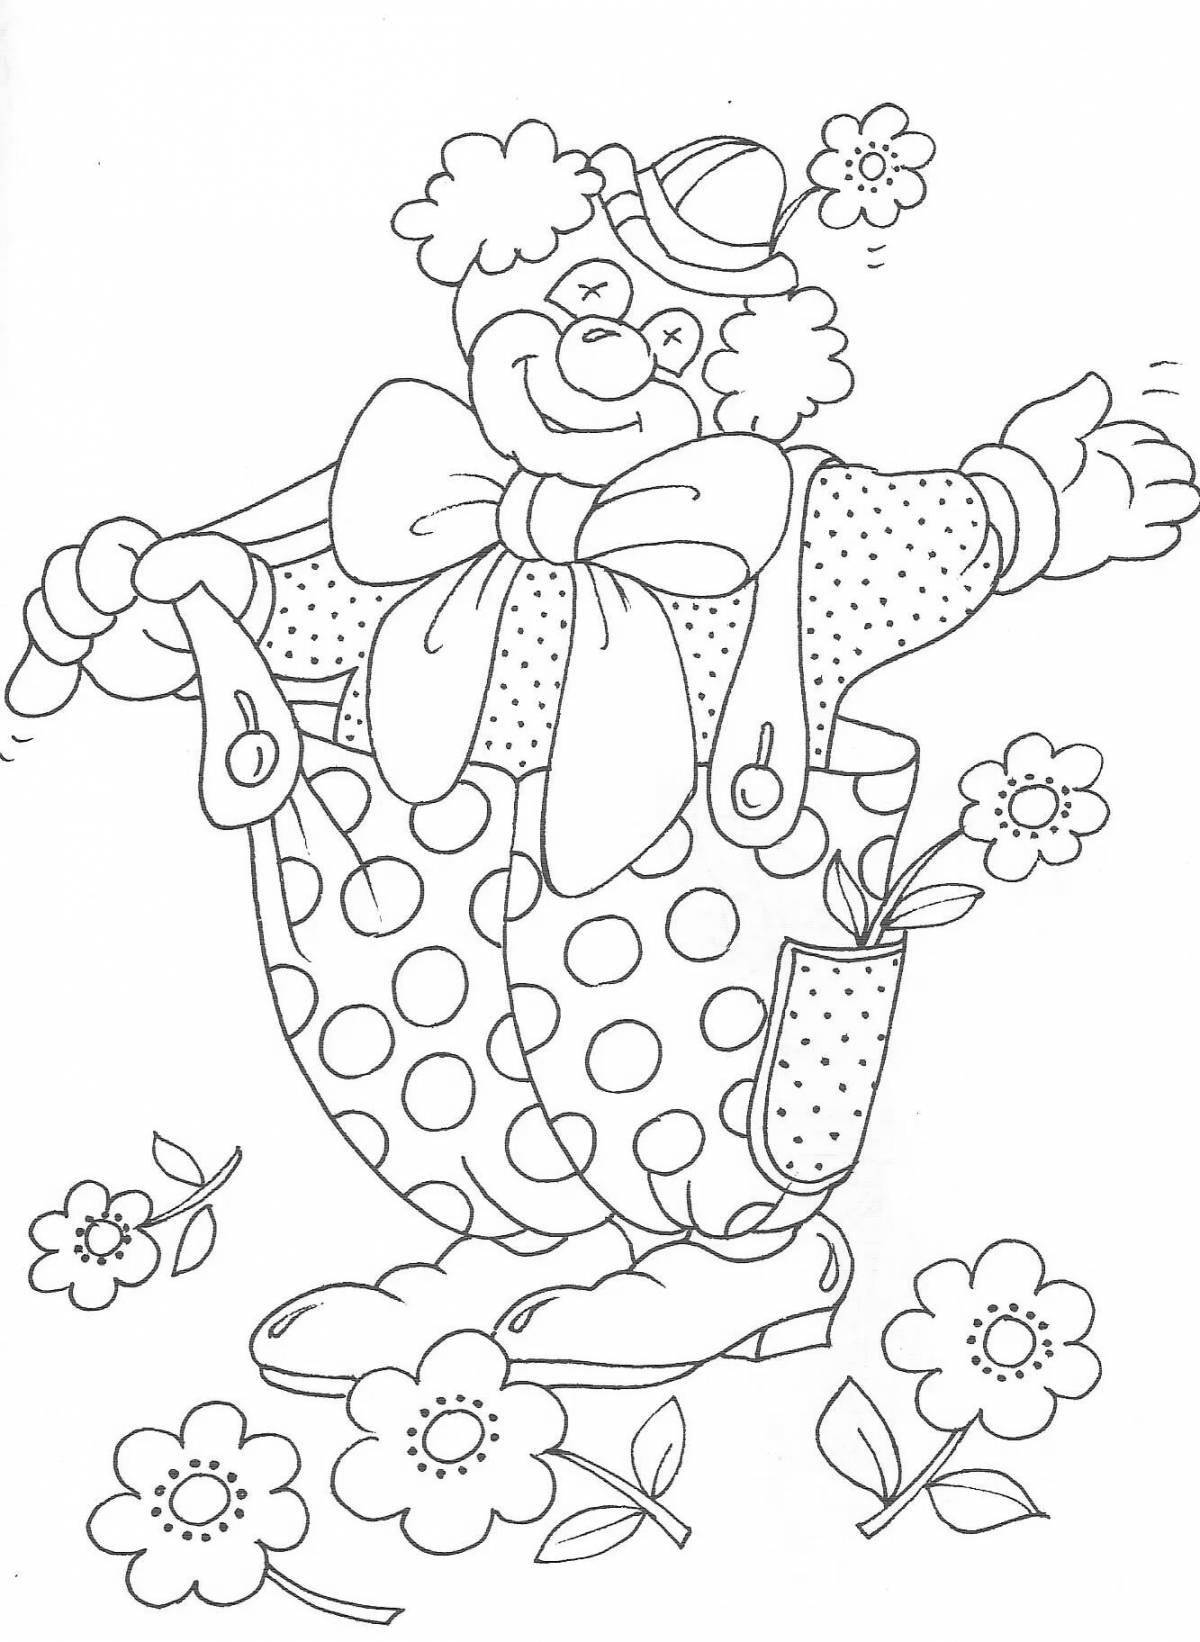 Funny clown coloring book for kids 6-7 years old